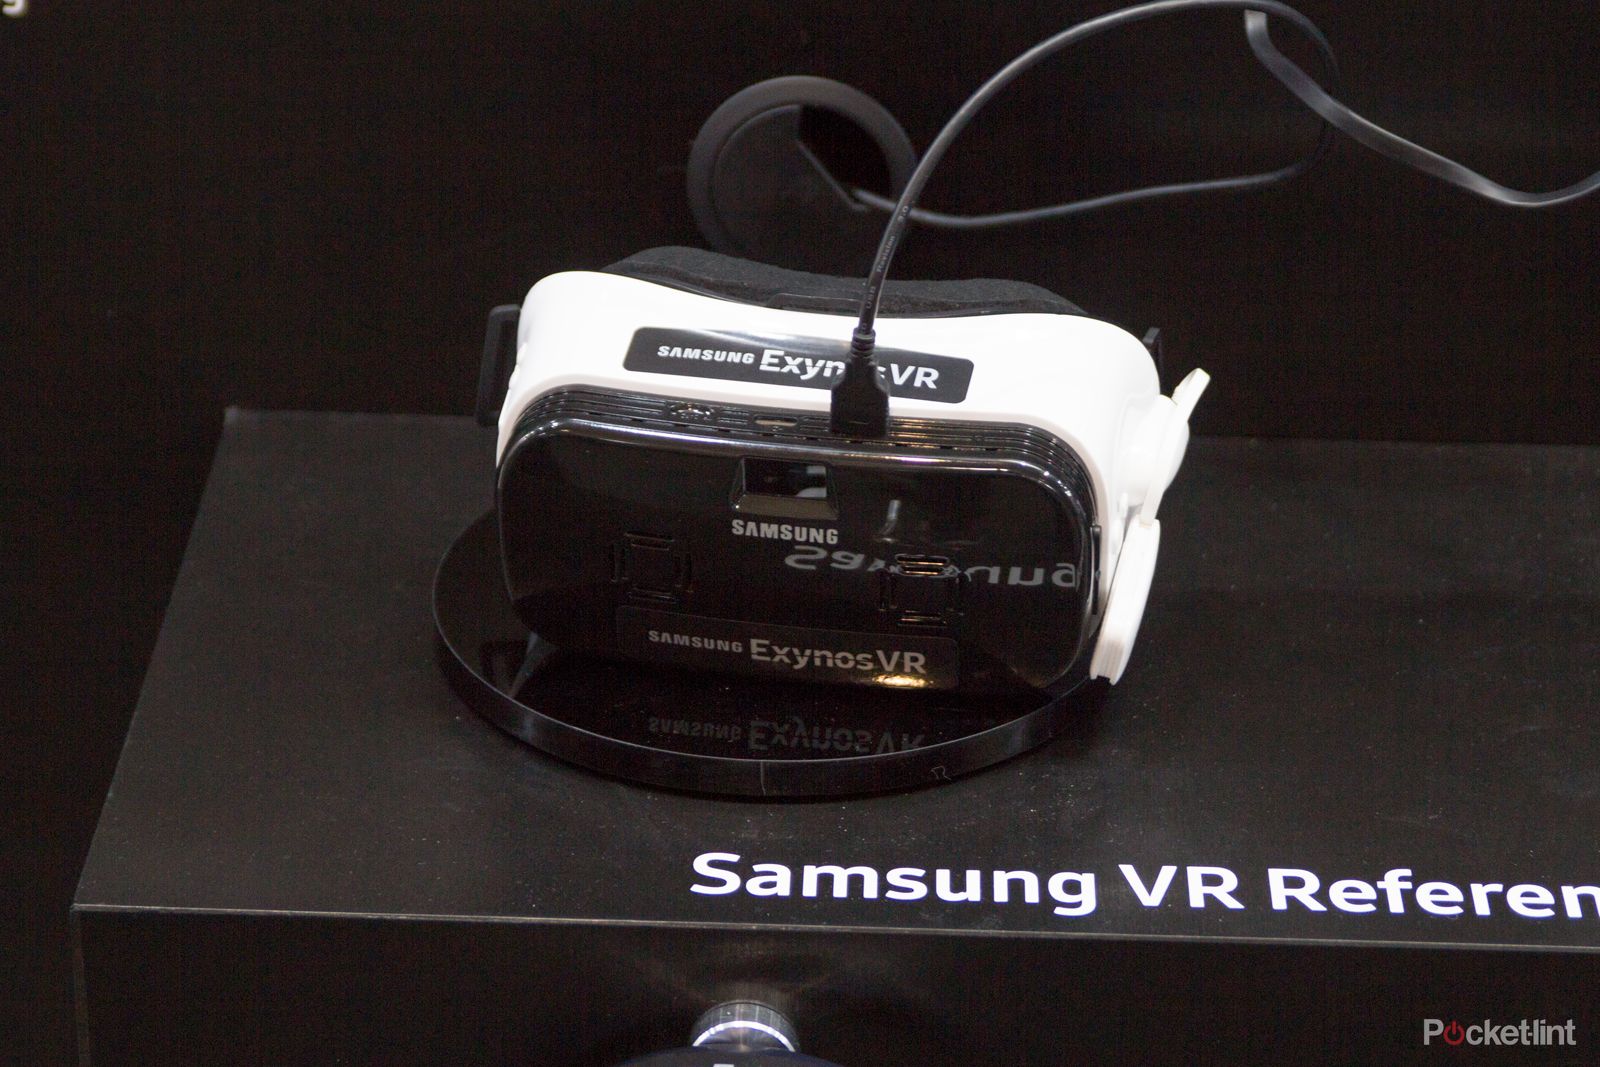 samsung exynos has ambitions beyond the galaxy s8 it s eyeing vr cars iot with a full range of chipset levels image 2